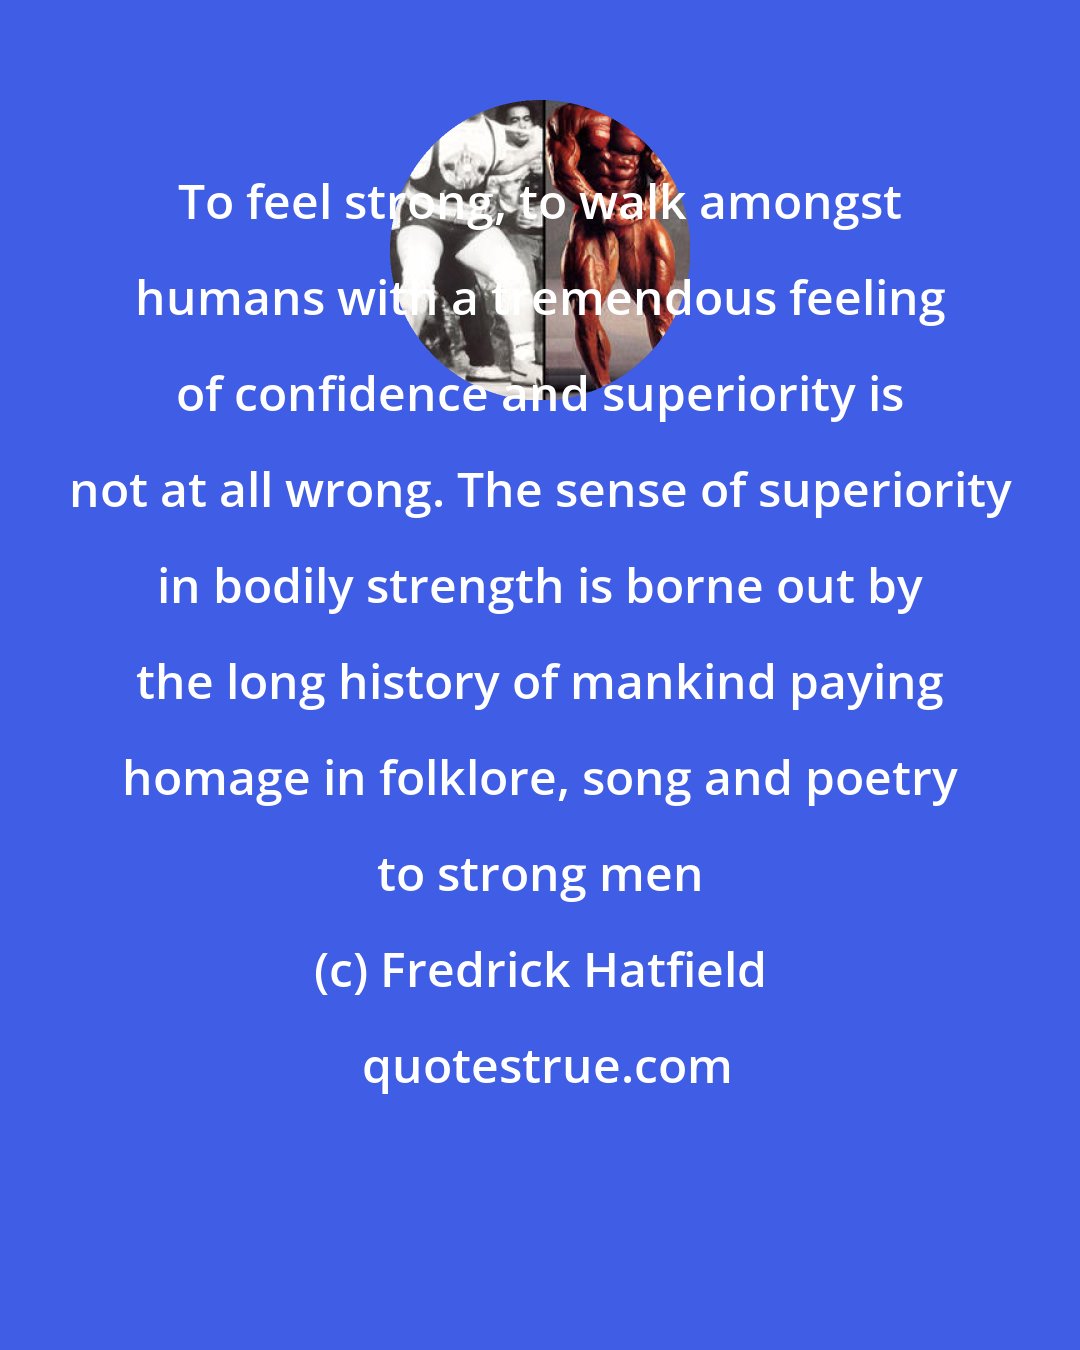 Fredrick Hatfield: To feel strong, to walk amongst humans with a tremendous feeling of confidence and superiority is not at all wrong. The sense of superiority in bodily strength is borne out by the long history of mankind paying homage in folklore, song and poetry to strong men